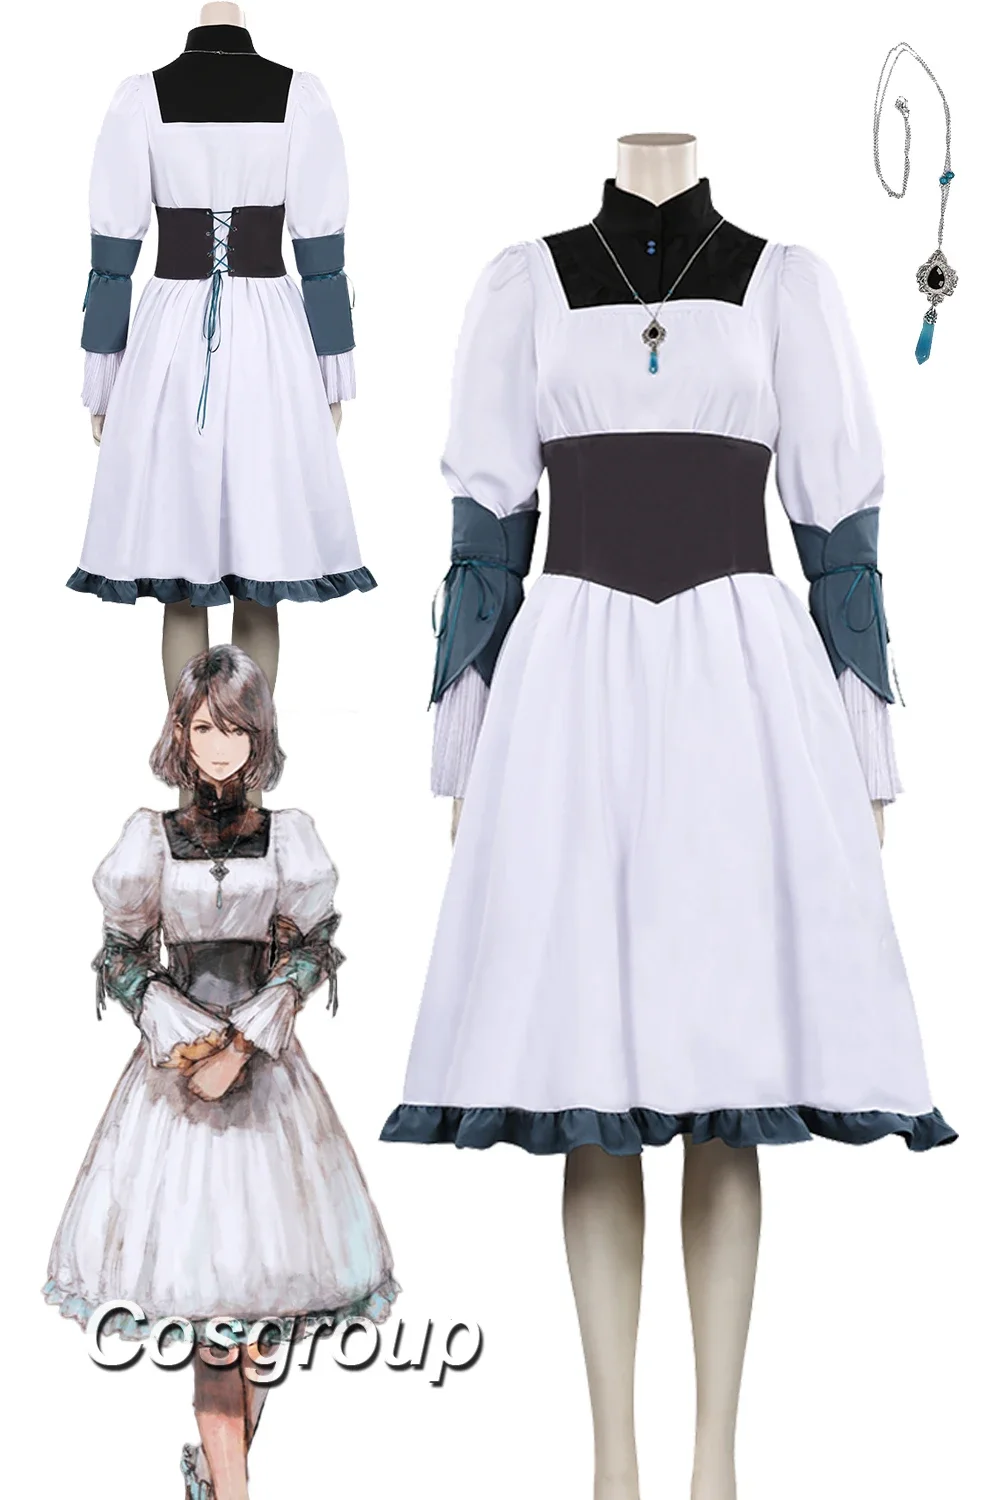 

FF16 Young Jill Warrick Cosplay Fantasia Anime Game Final Fantasy XVI Costume Disguise Adult Women Fantasy Halloween Party Cloth